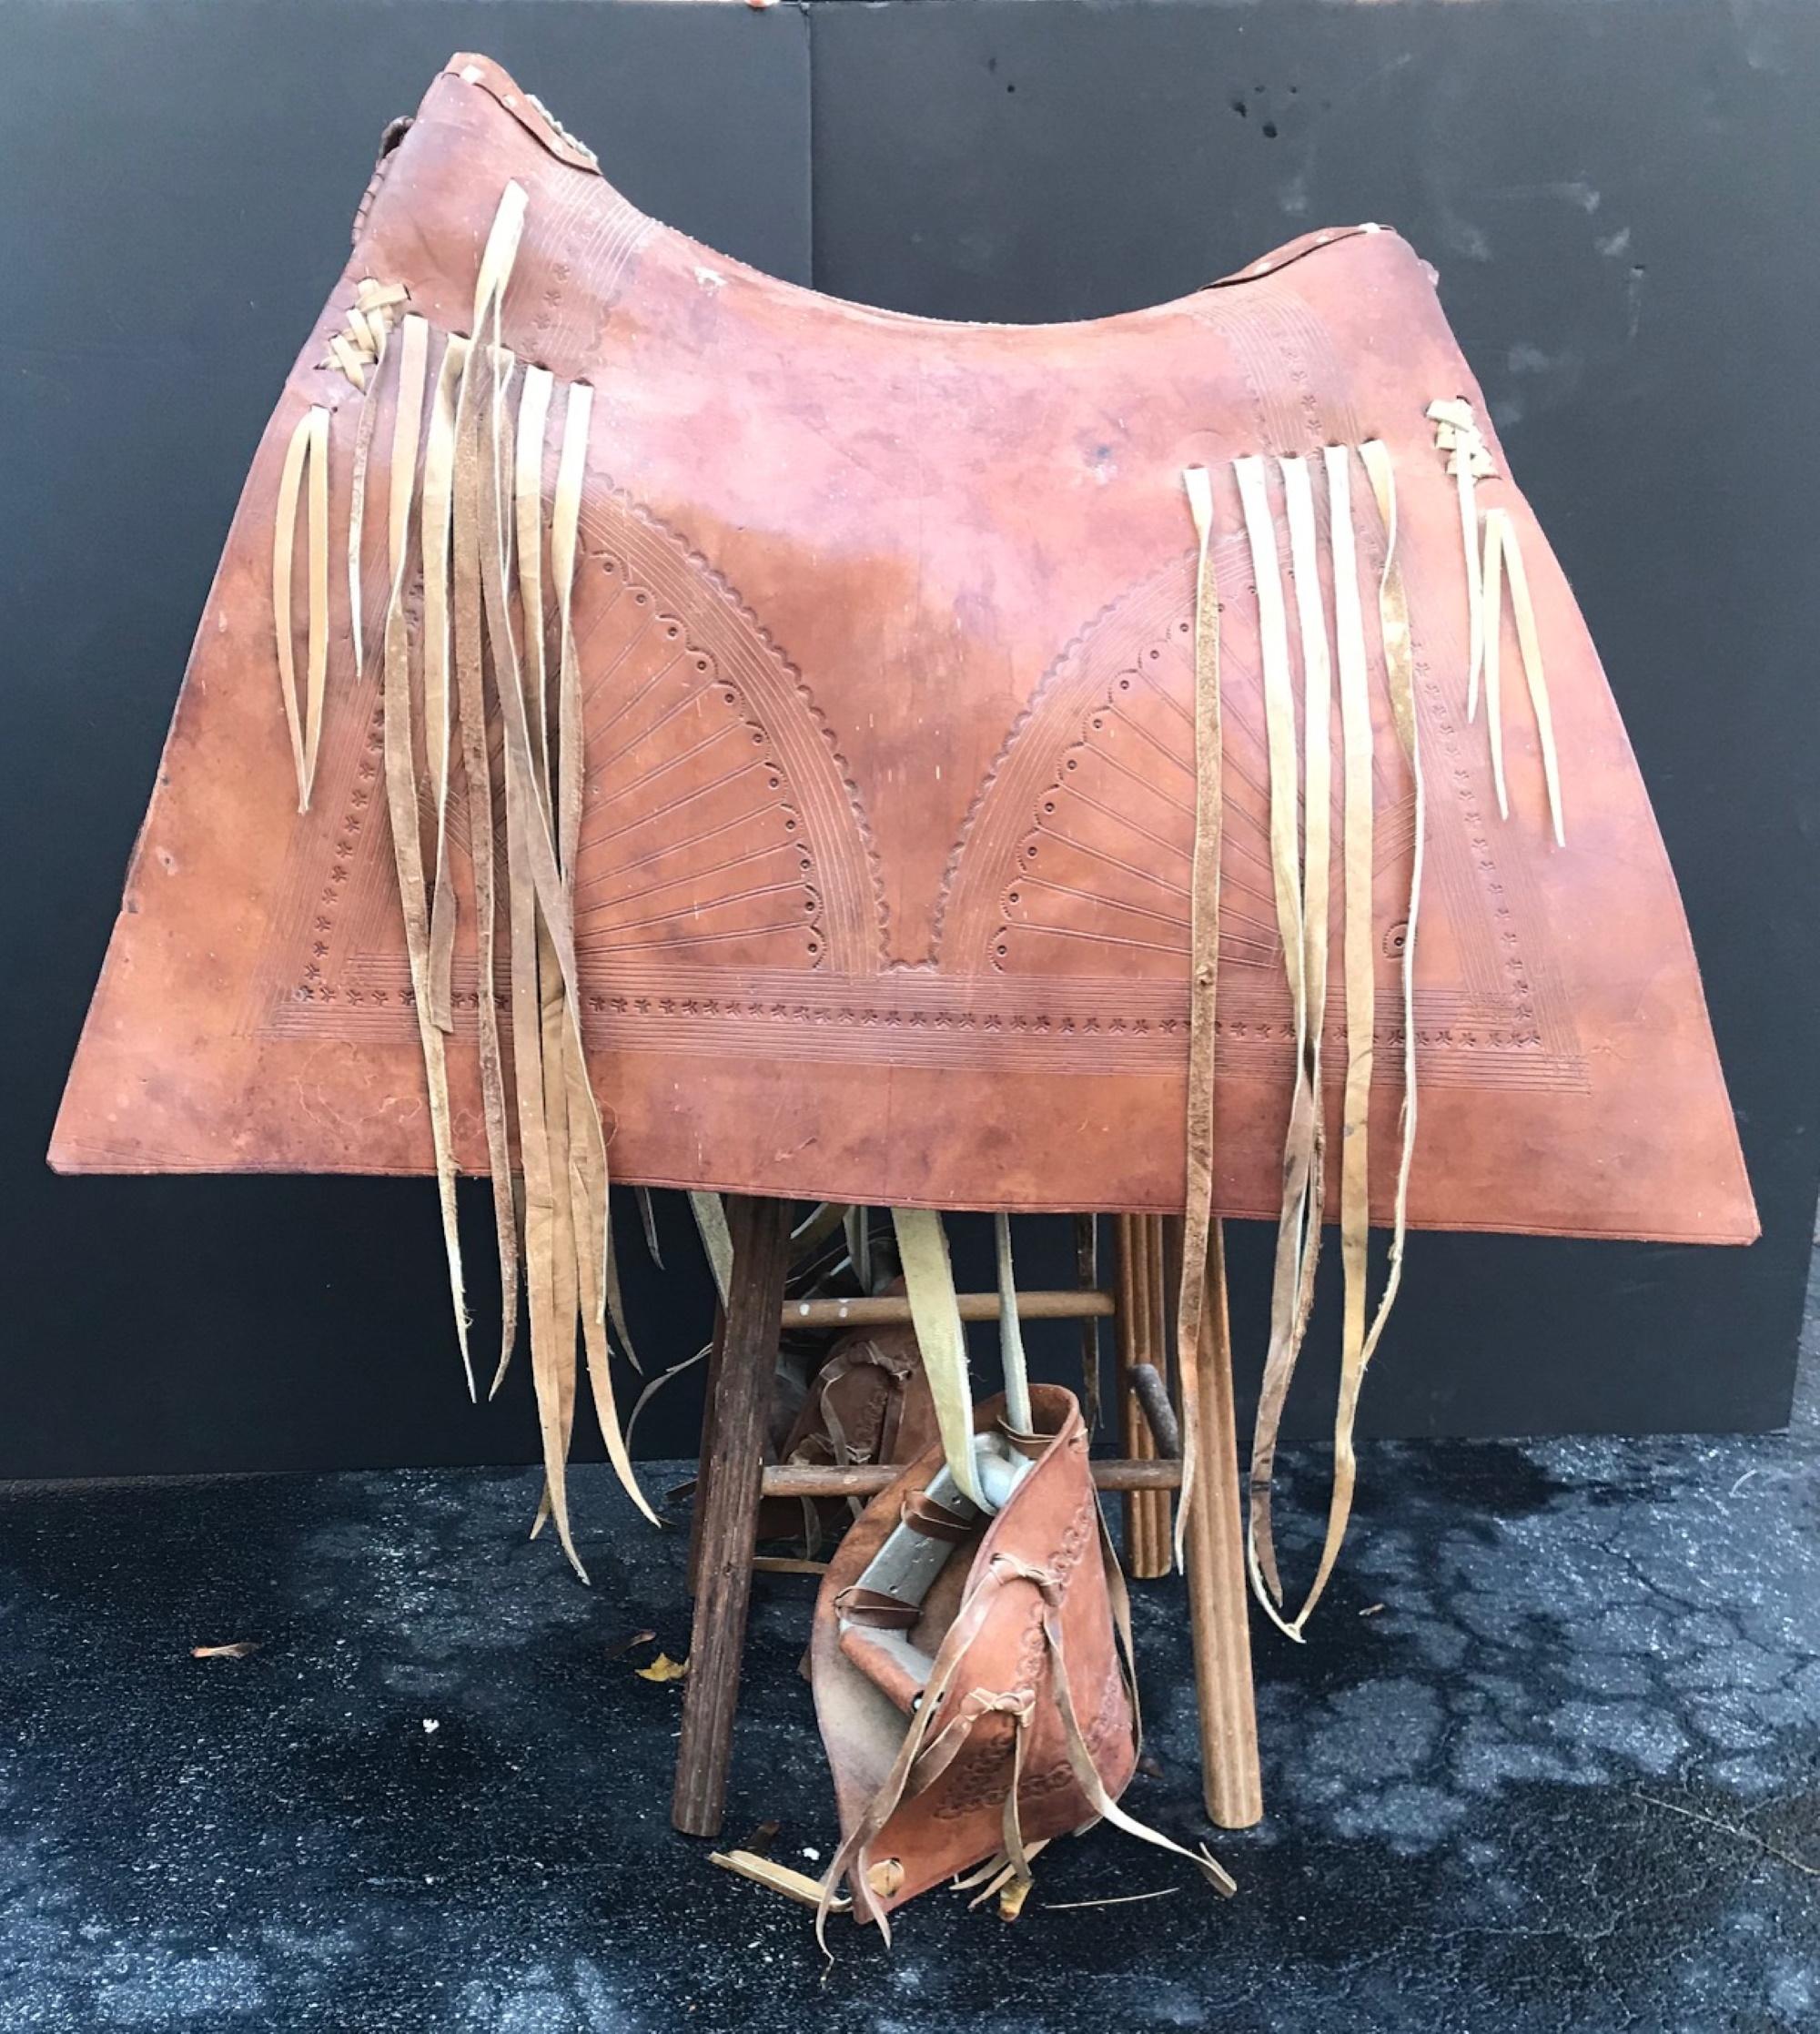 Stately and elegant Argentine gaucho saddle with tapaderos hooded stirrups, used by the famed South American horsemen of the pampas. This decoratively tooled saddle, in its almost new condition, is undoubtedly crafted for presentational use. It is